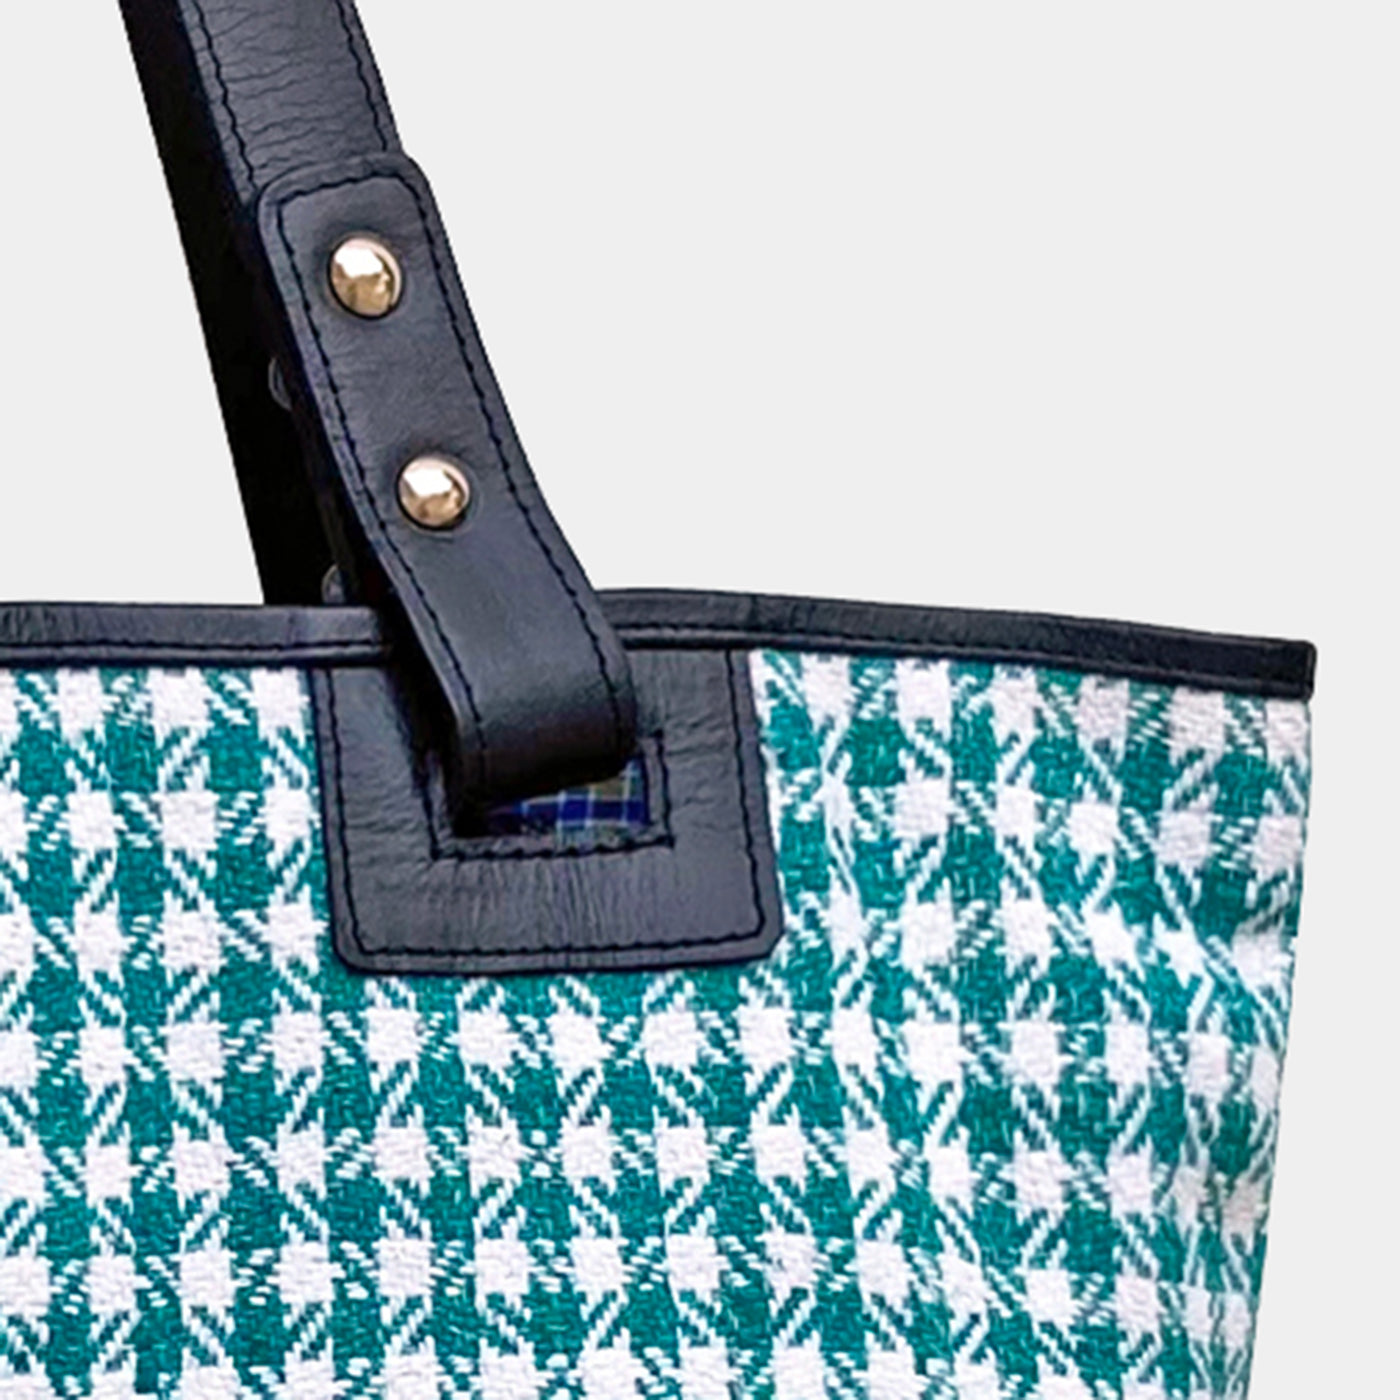 Checks tote from Joli in green and white with leather handle 